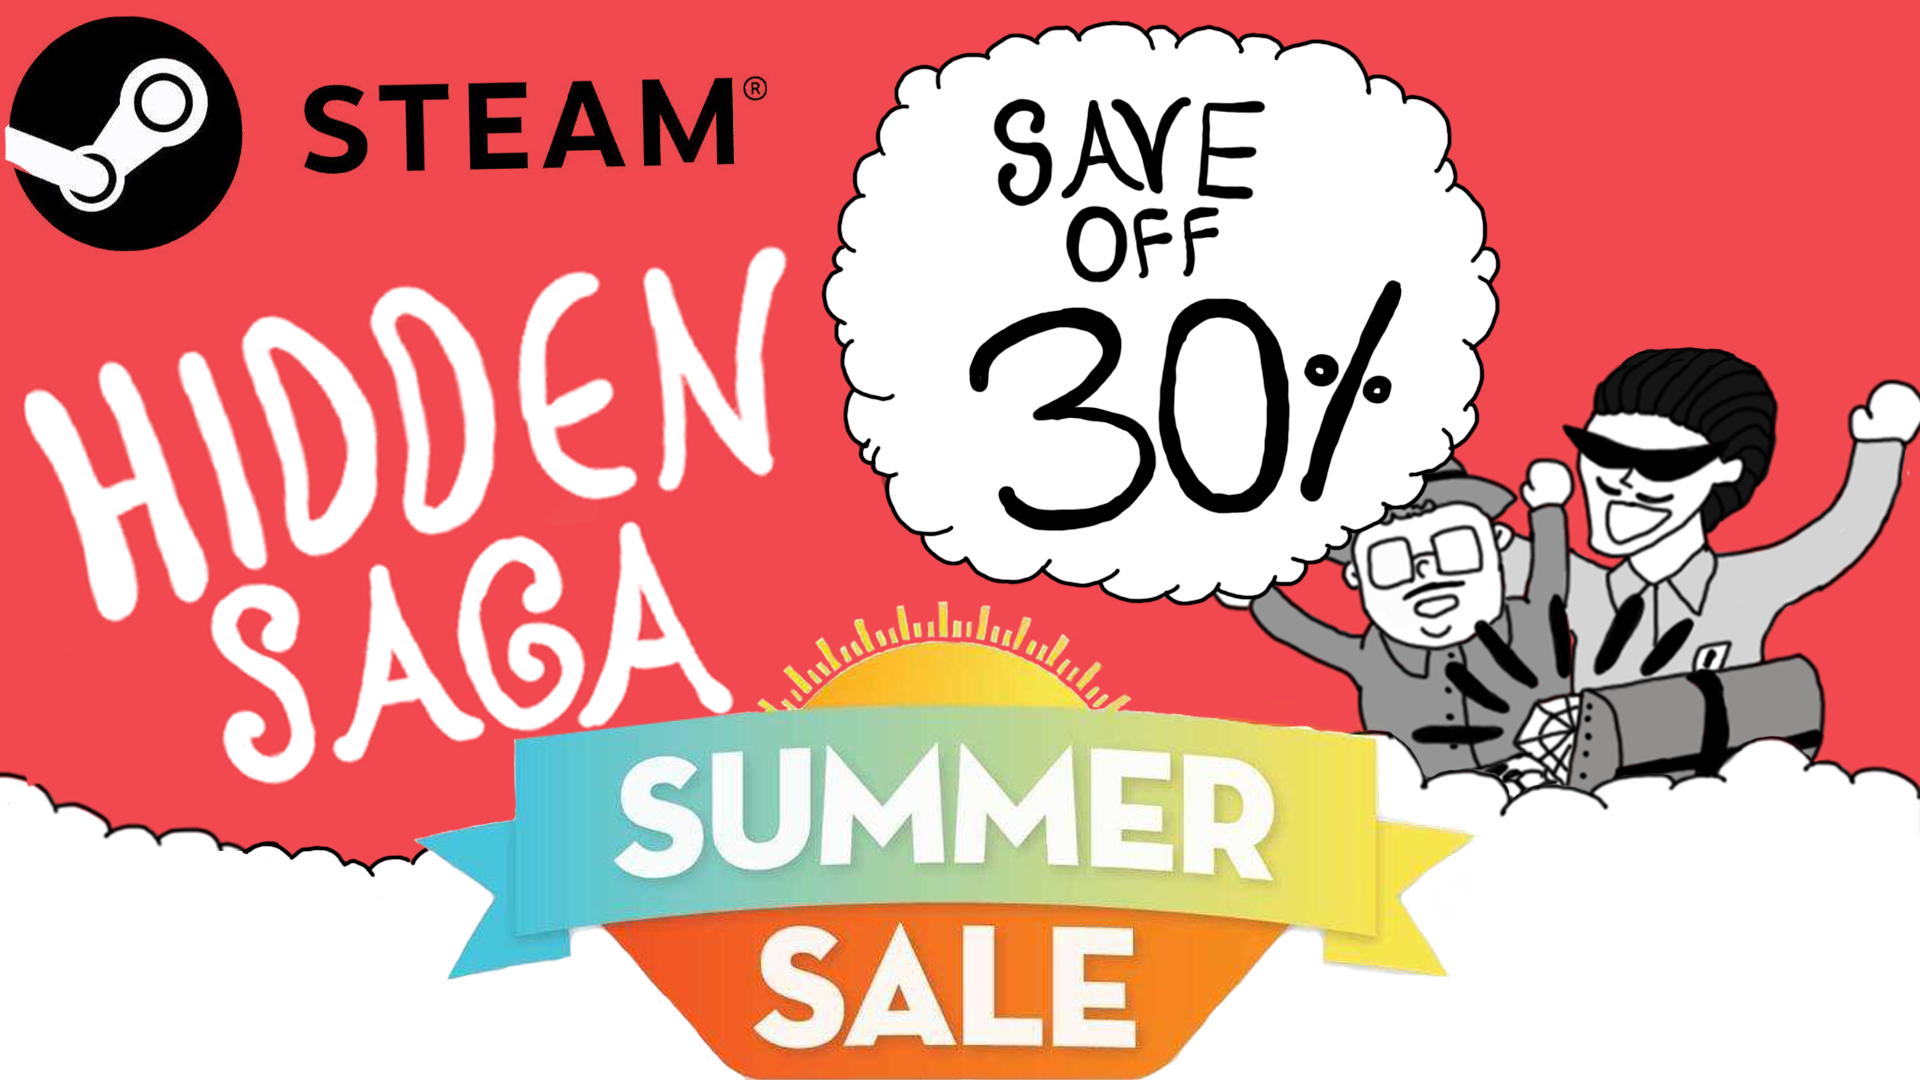 Steam secret. Summer sale. Summer sale 30%. Summer sale up to 30%. Summer sale Education.